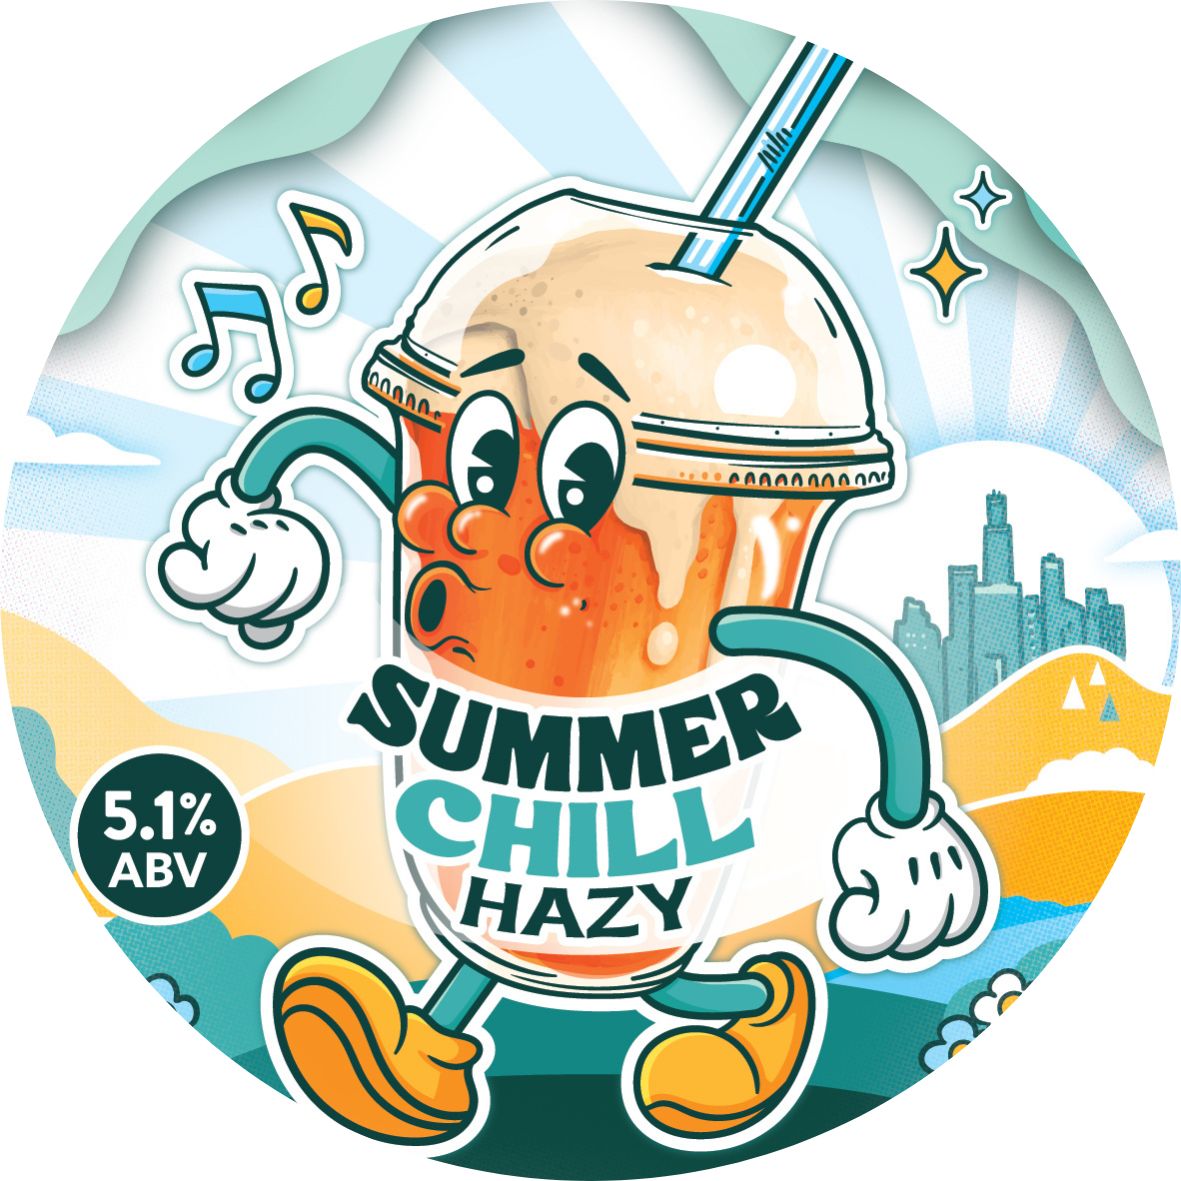 Summer Chill Hazy limited release beer label